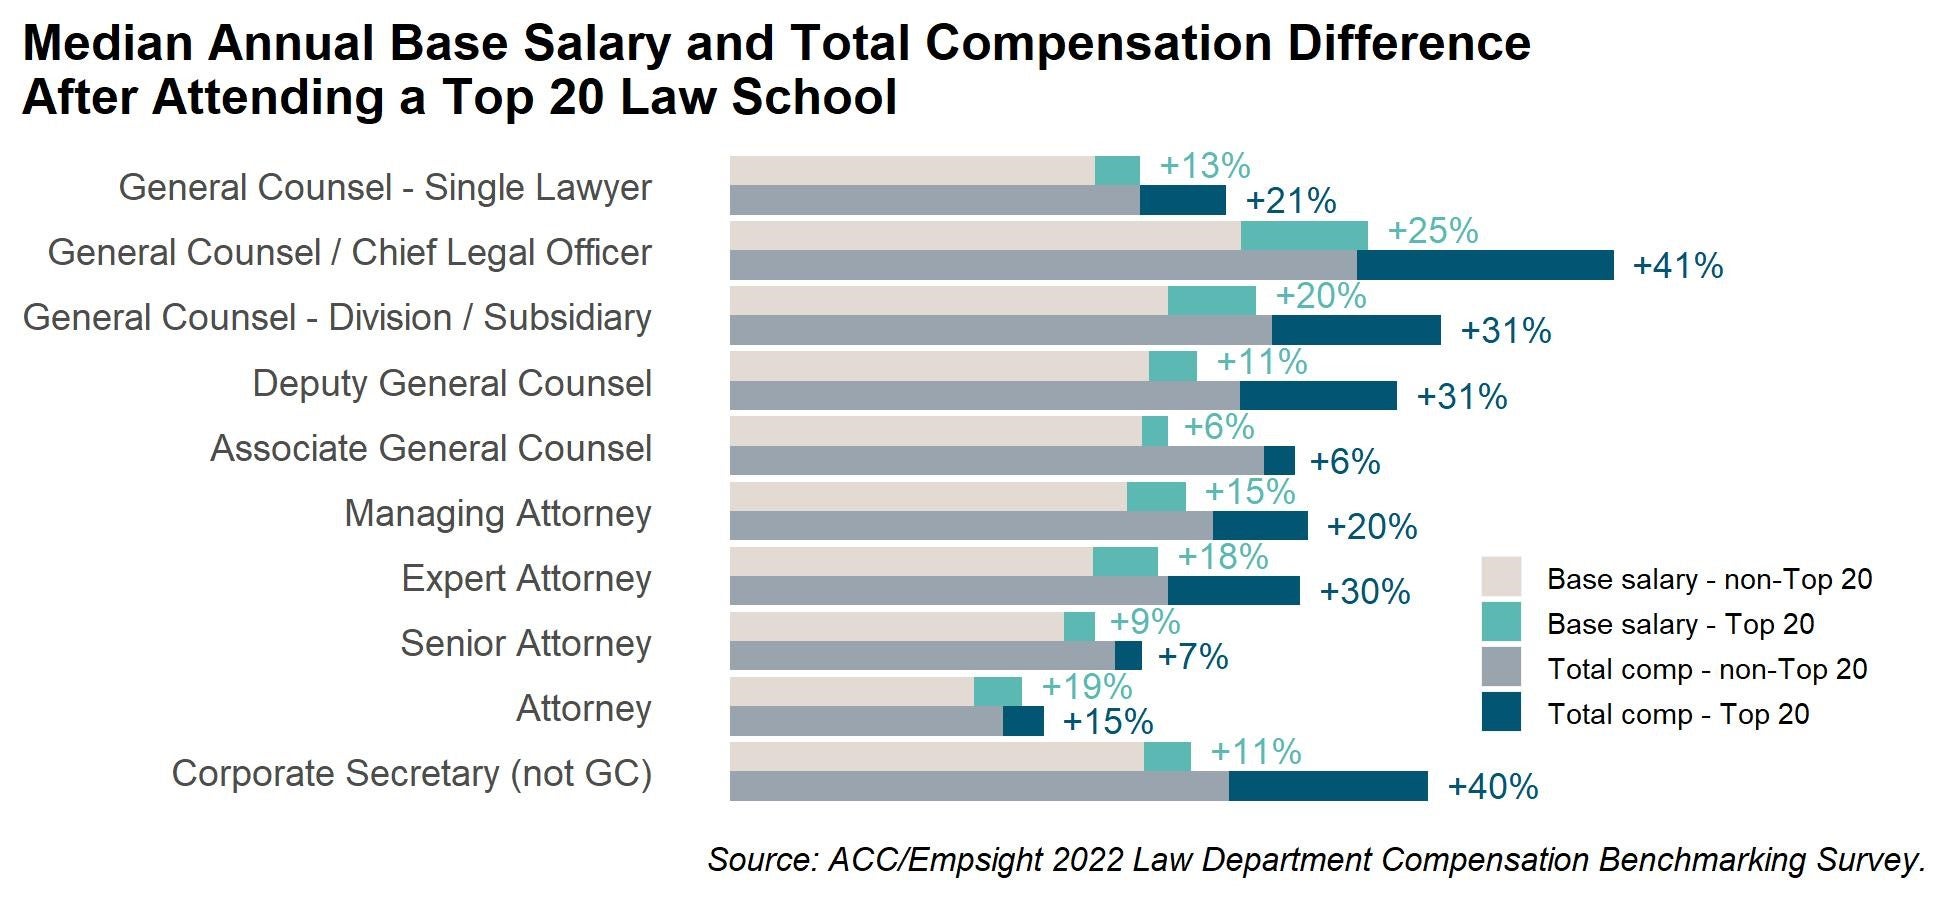 Median Annual Base Salary and Total Compensation Difference After Attending a Top 20 Law School - chart